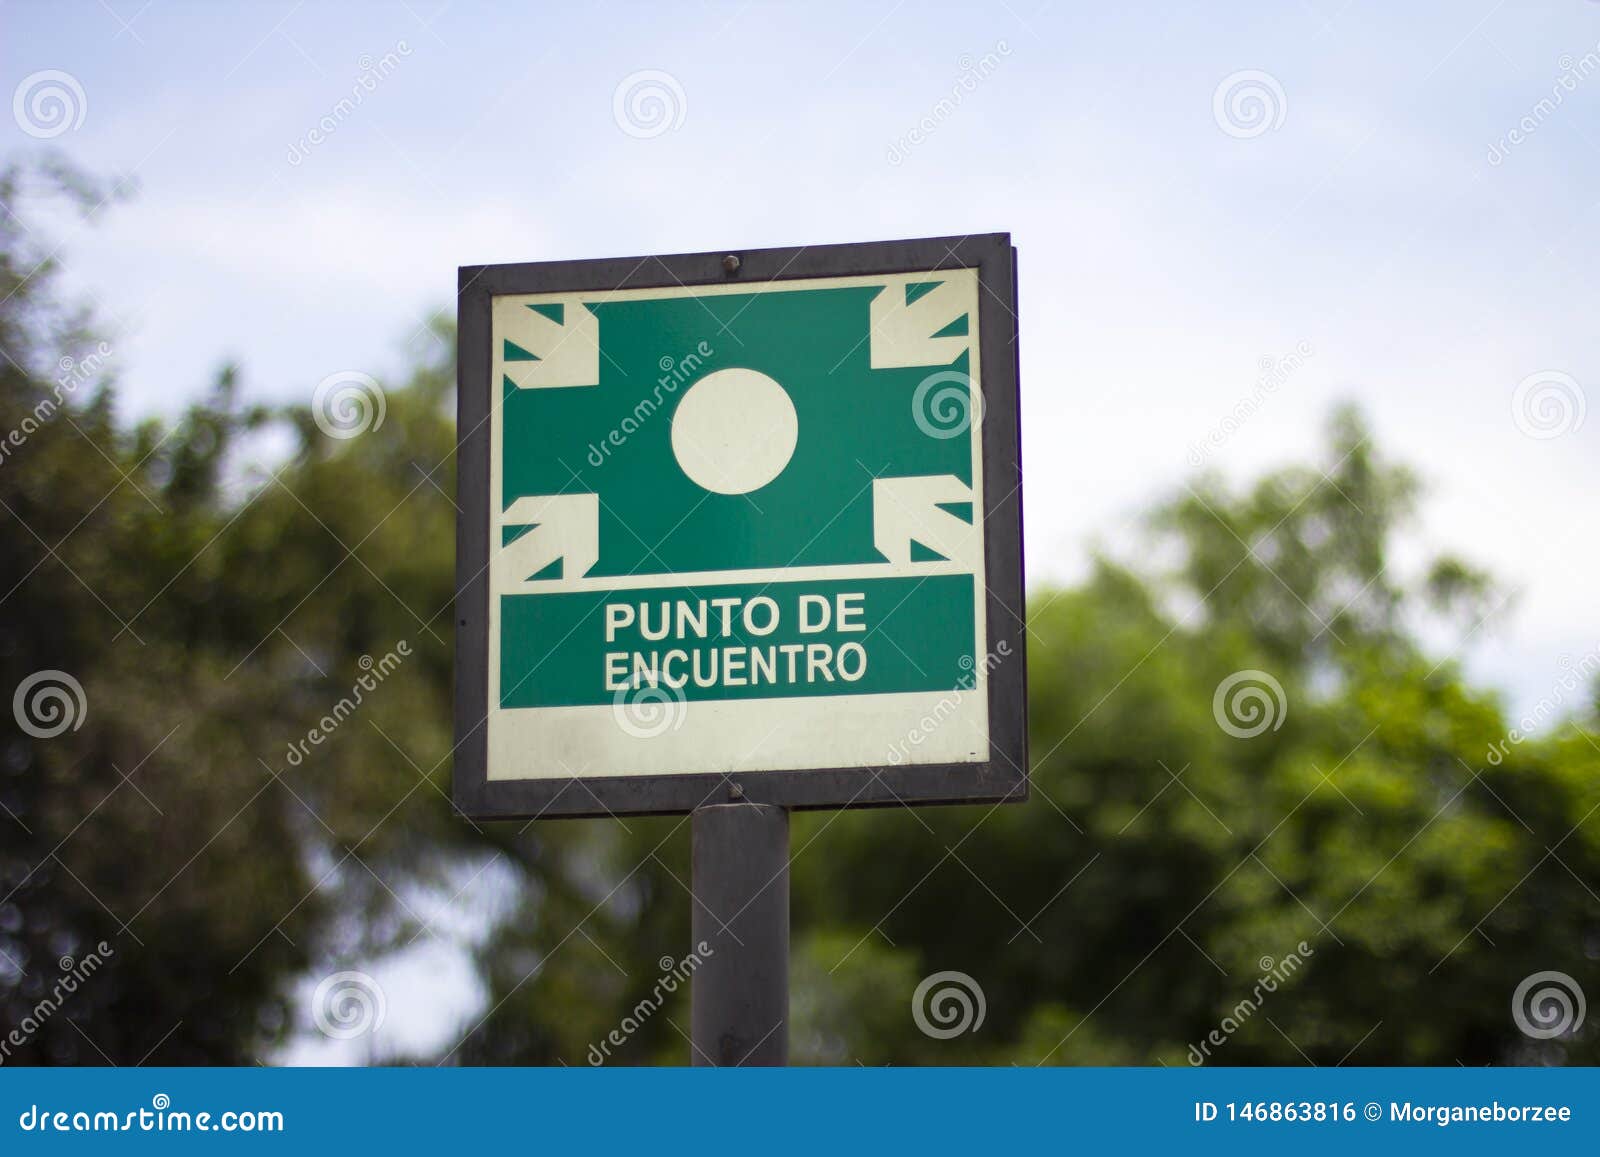 street sign of `punto de encuentro` meeting point